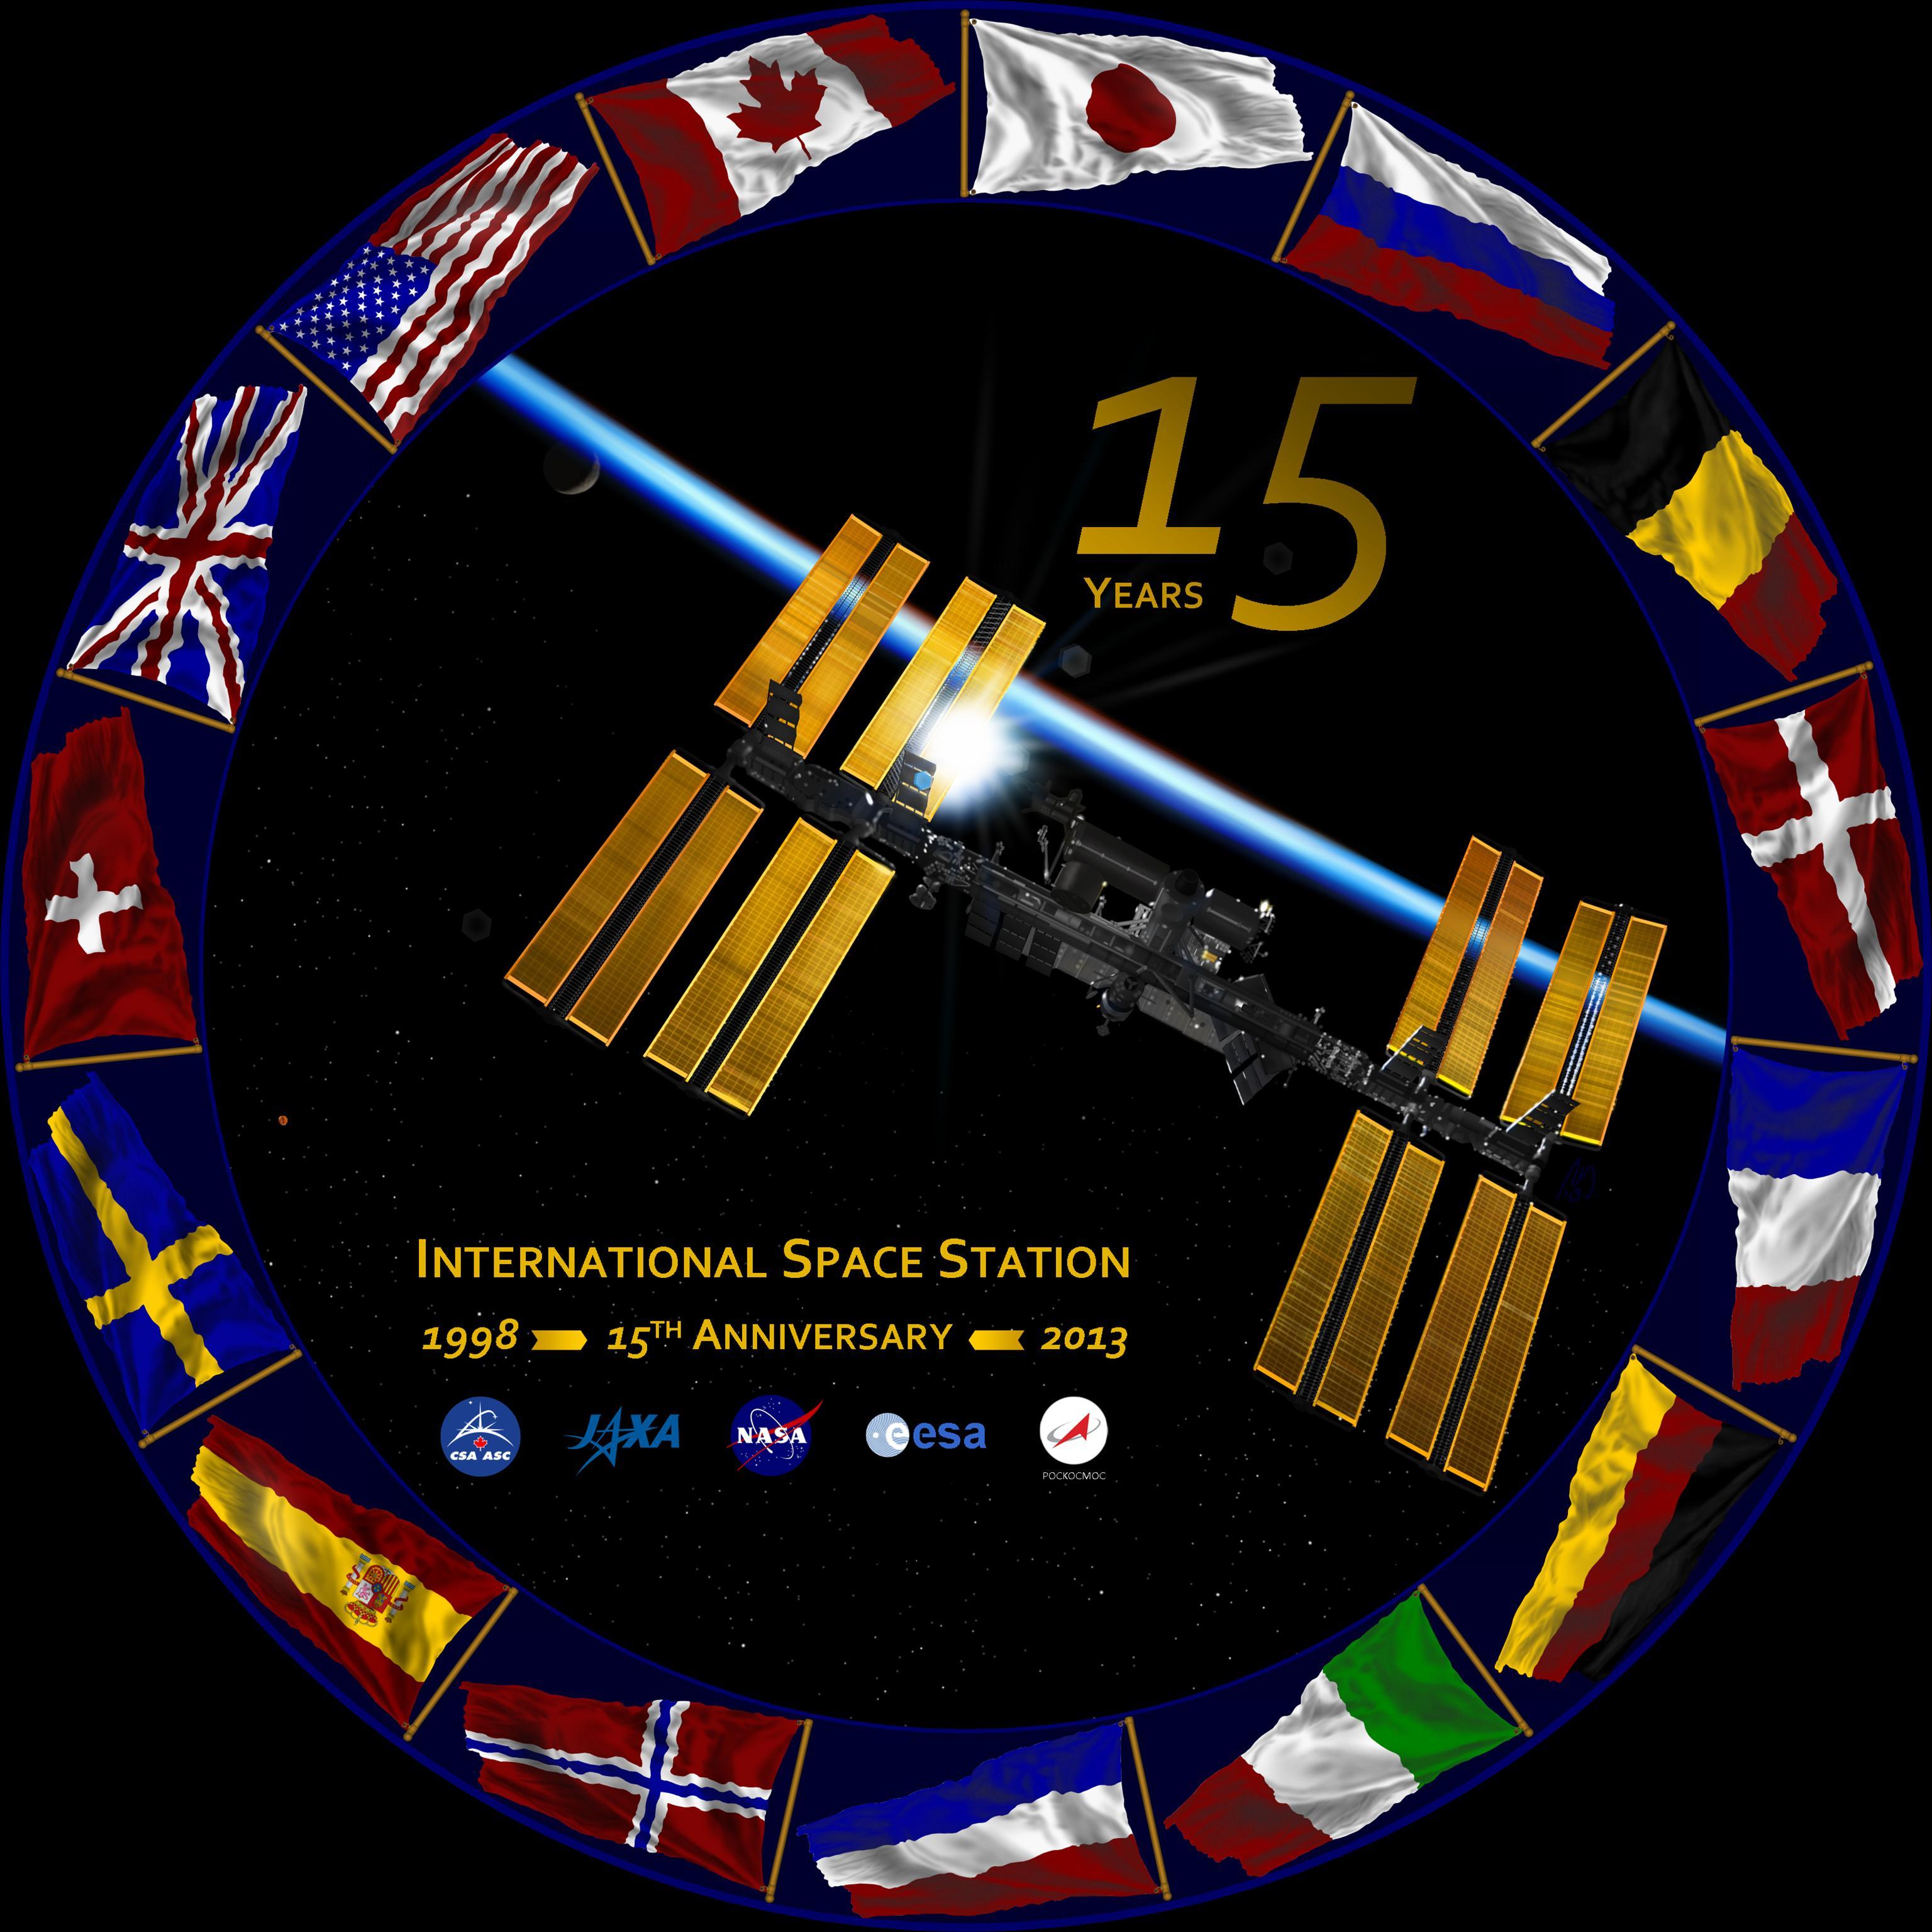 International NASA Logo - JSC Features C. Jansen: The merging of two passions